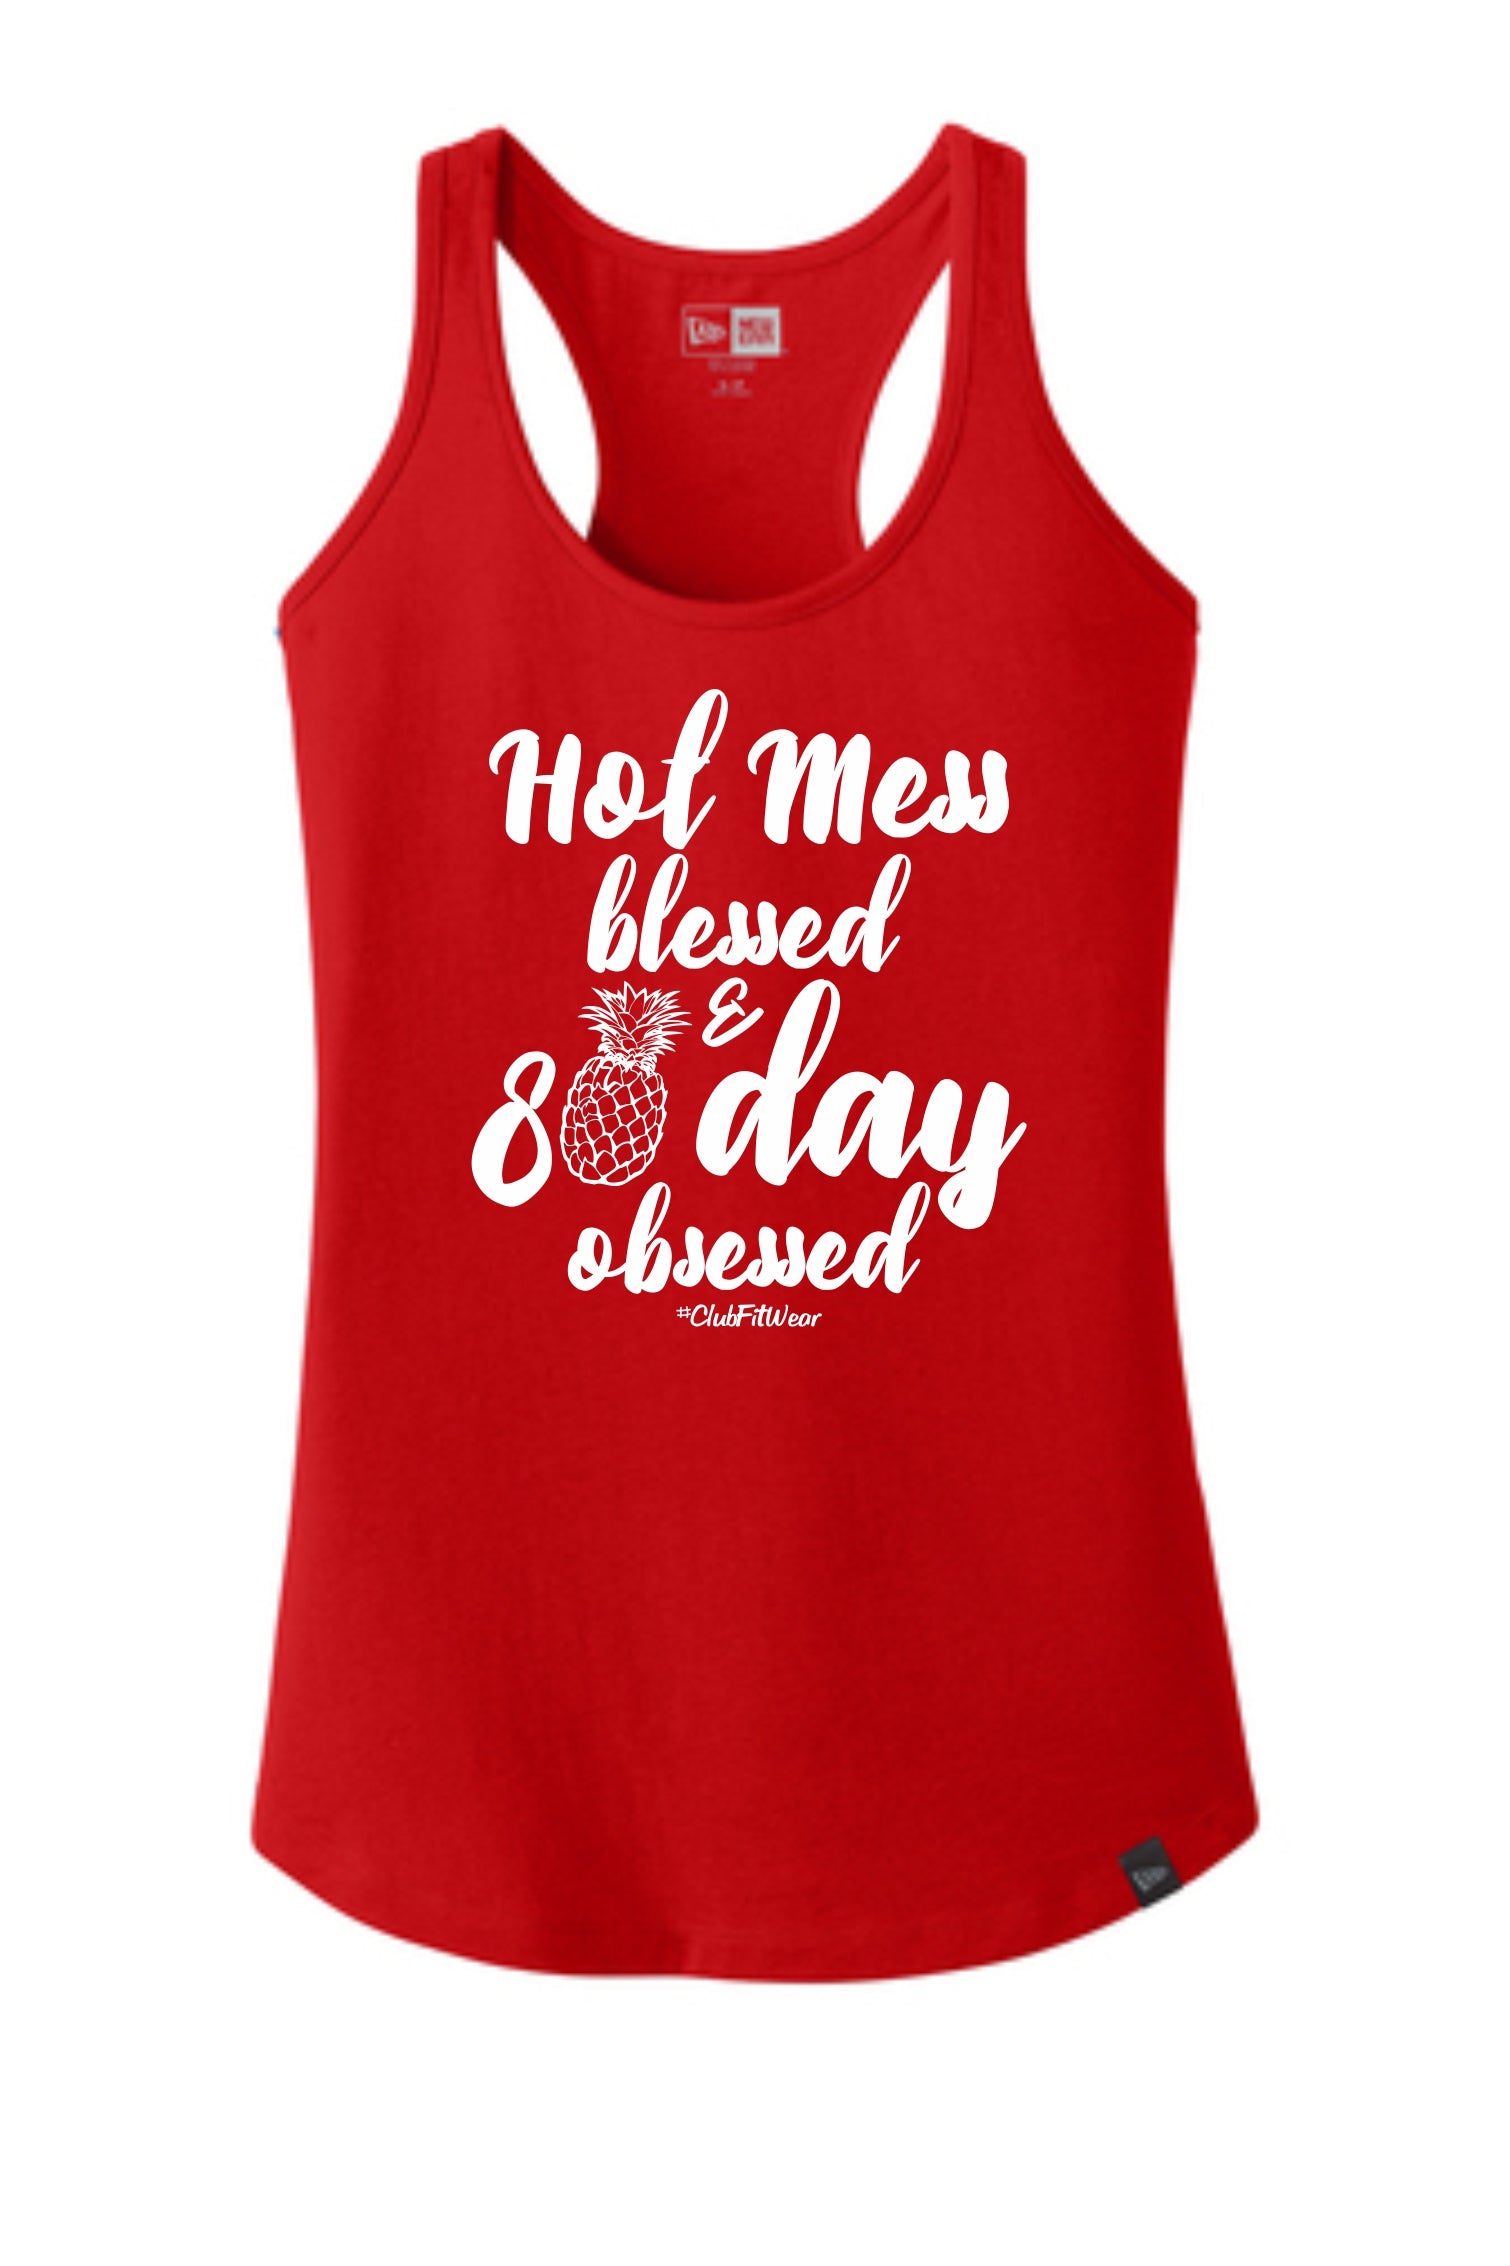 Hot Mess Blessed and 80 Day Obsessed – ClubFitWear